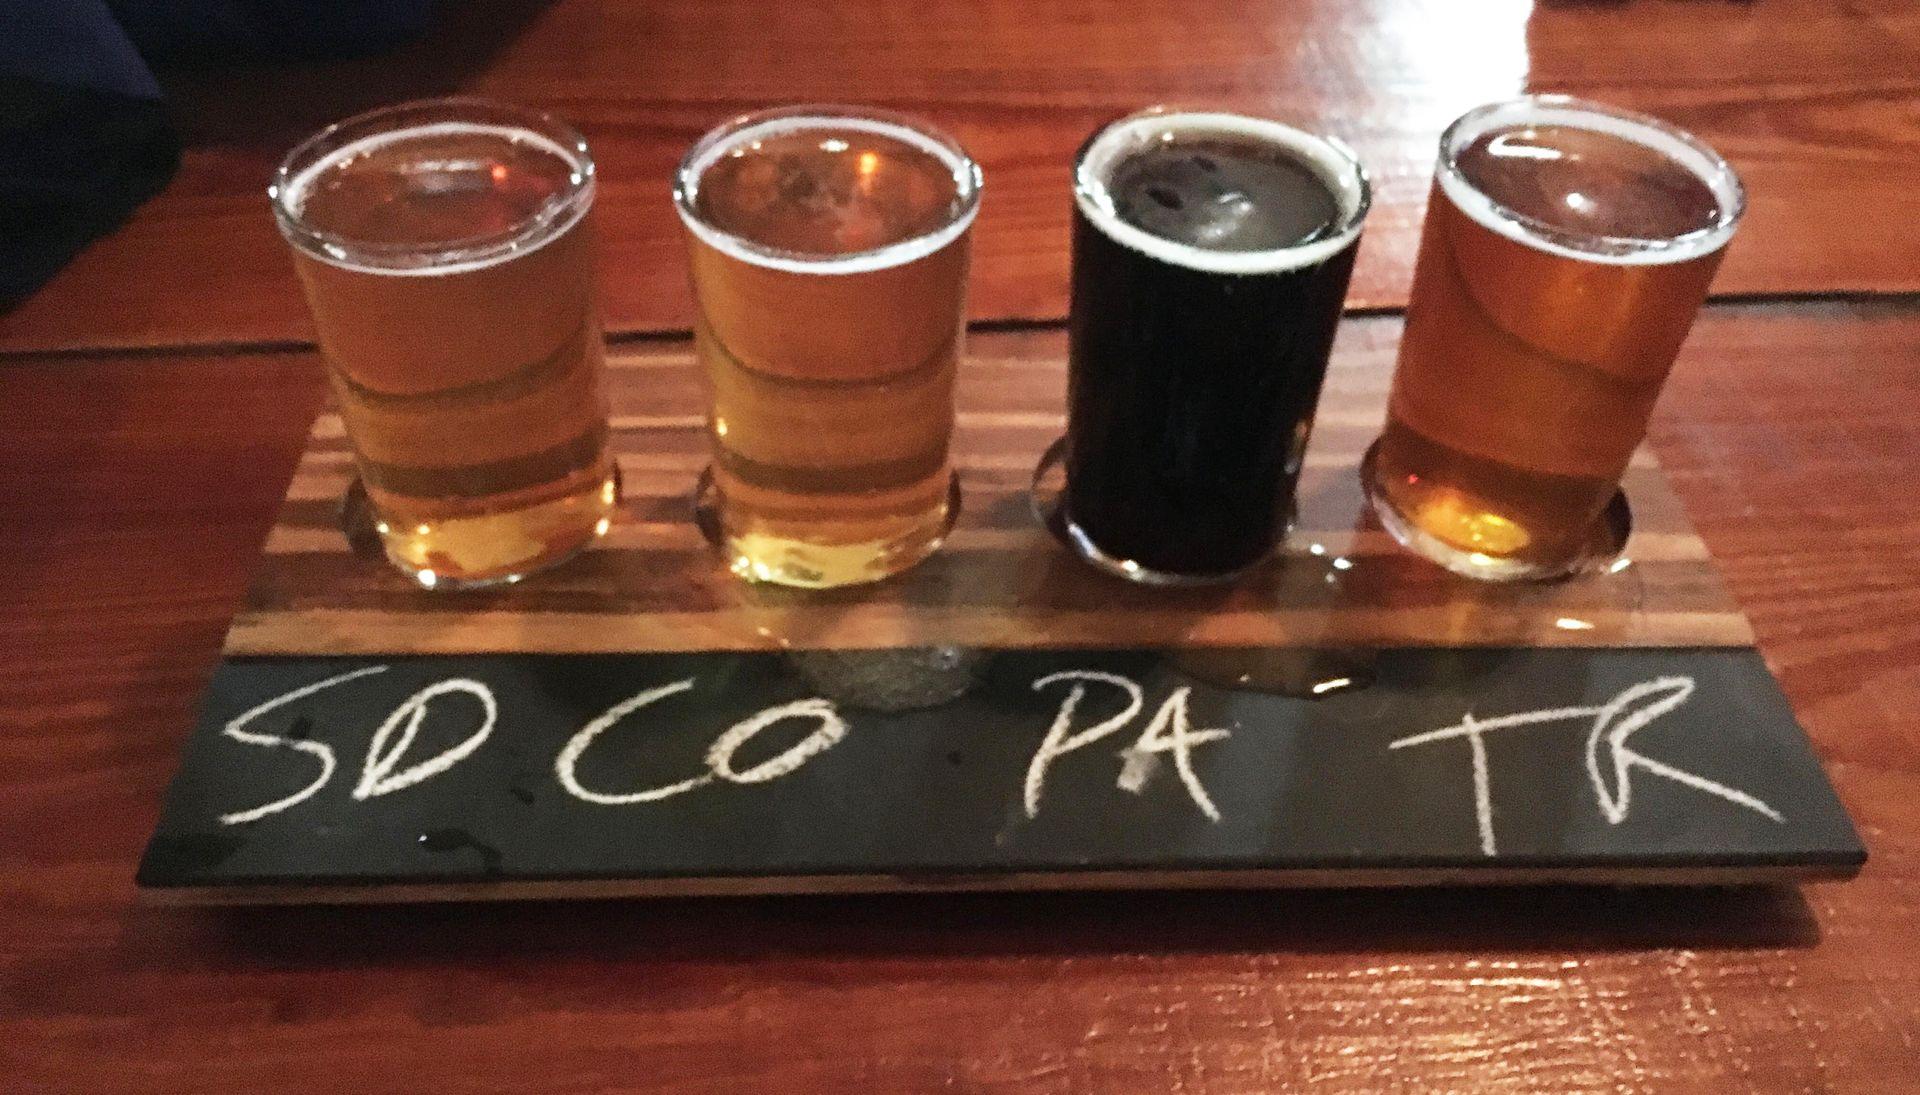 A flight of 4 beers from Rhinegeist Brewery